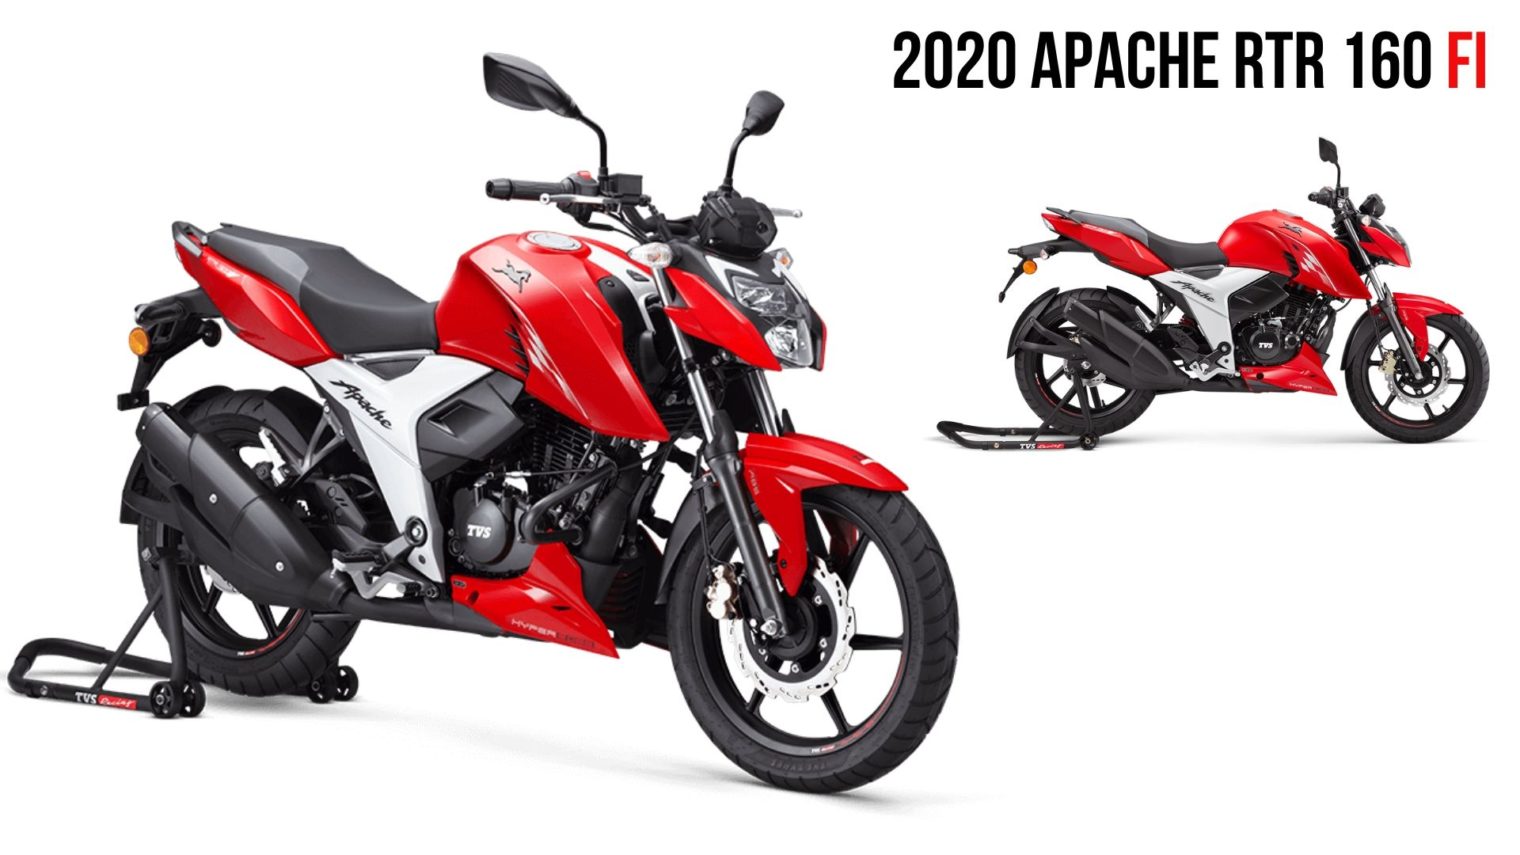 Tvs Apache Rtr 160 Fi Launched At Rs 99 050